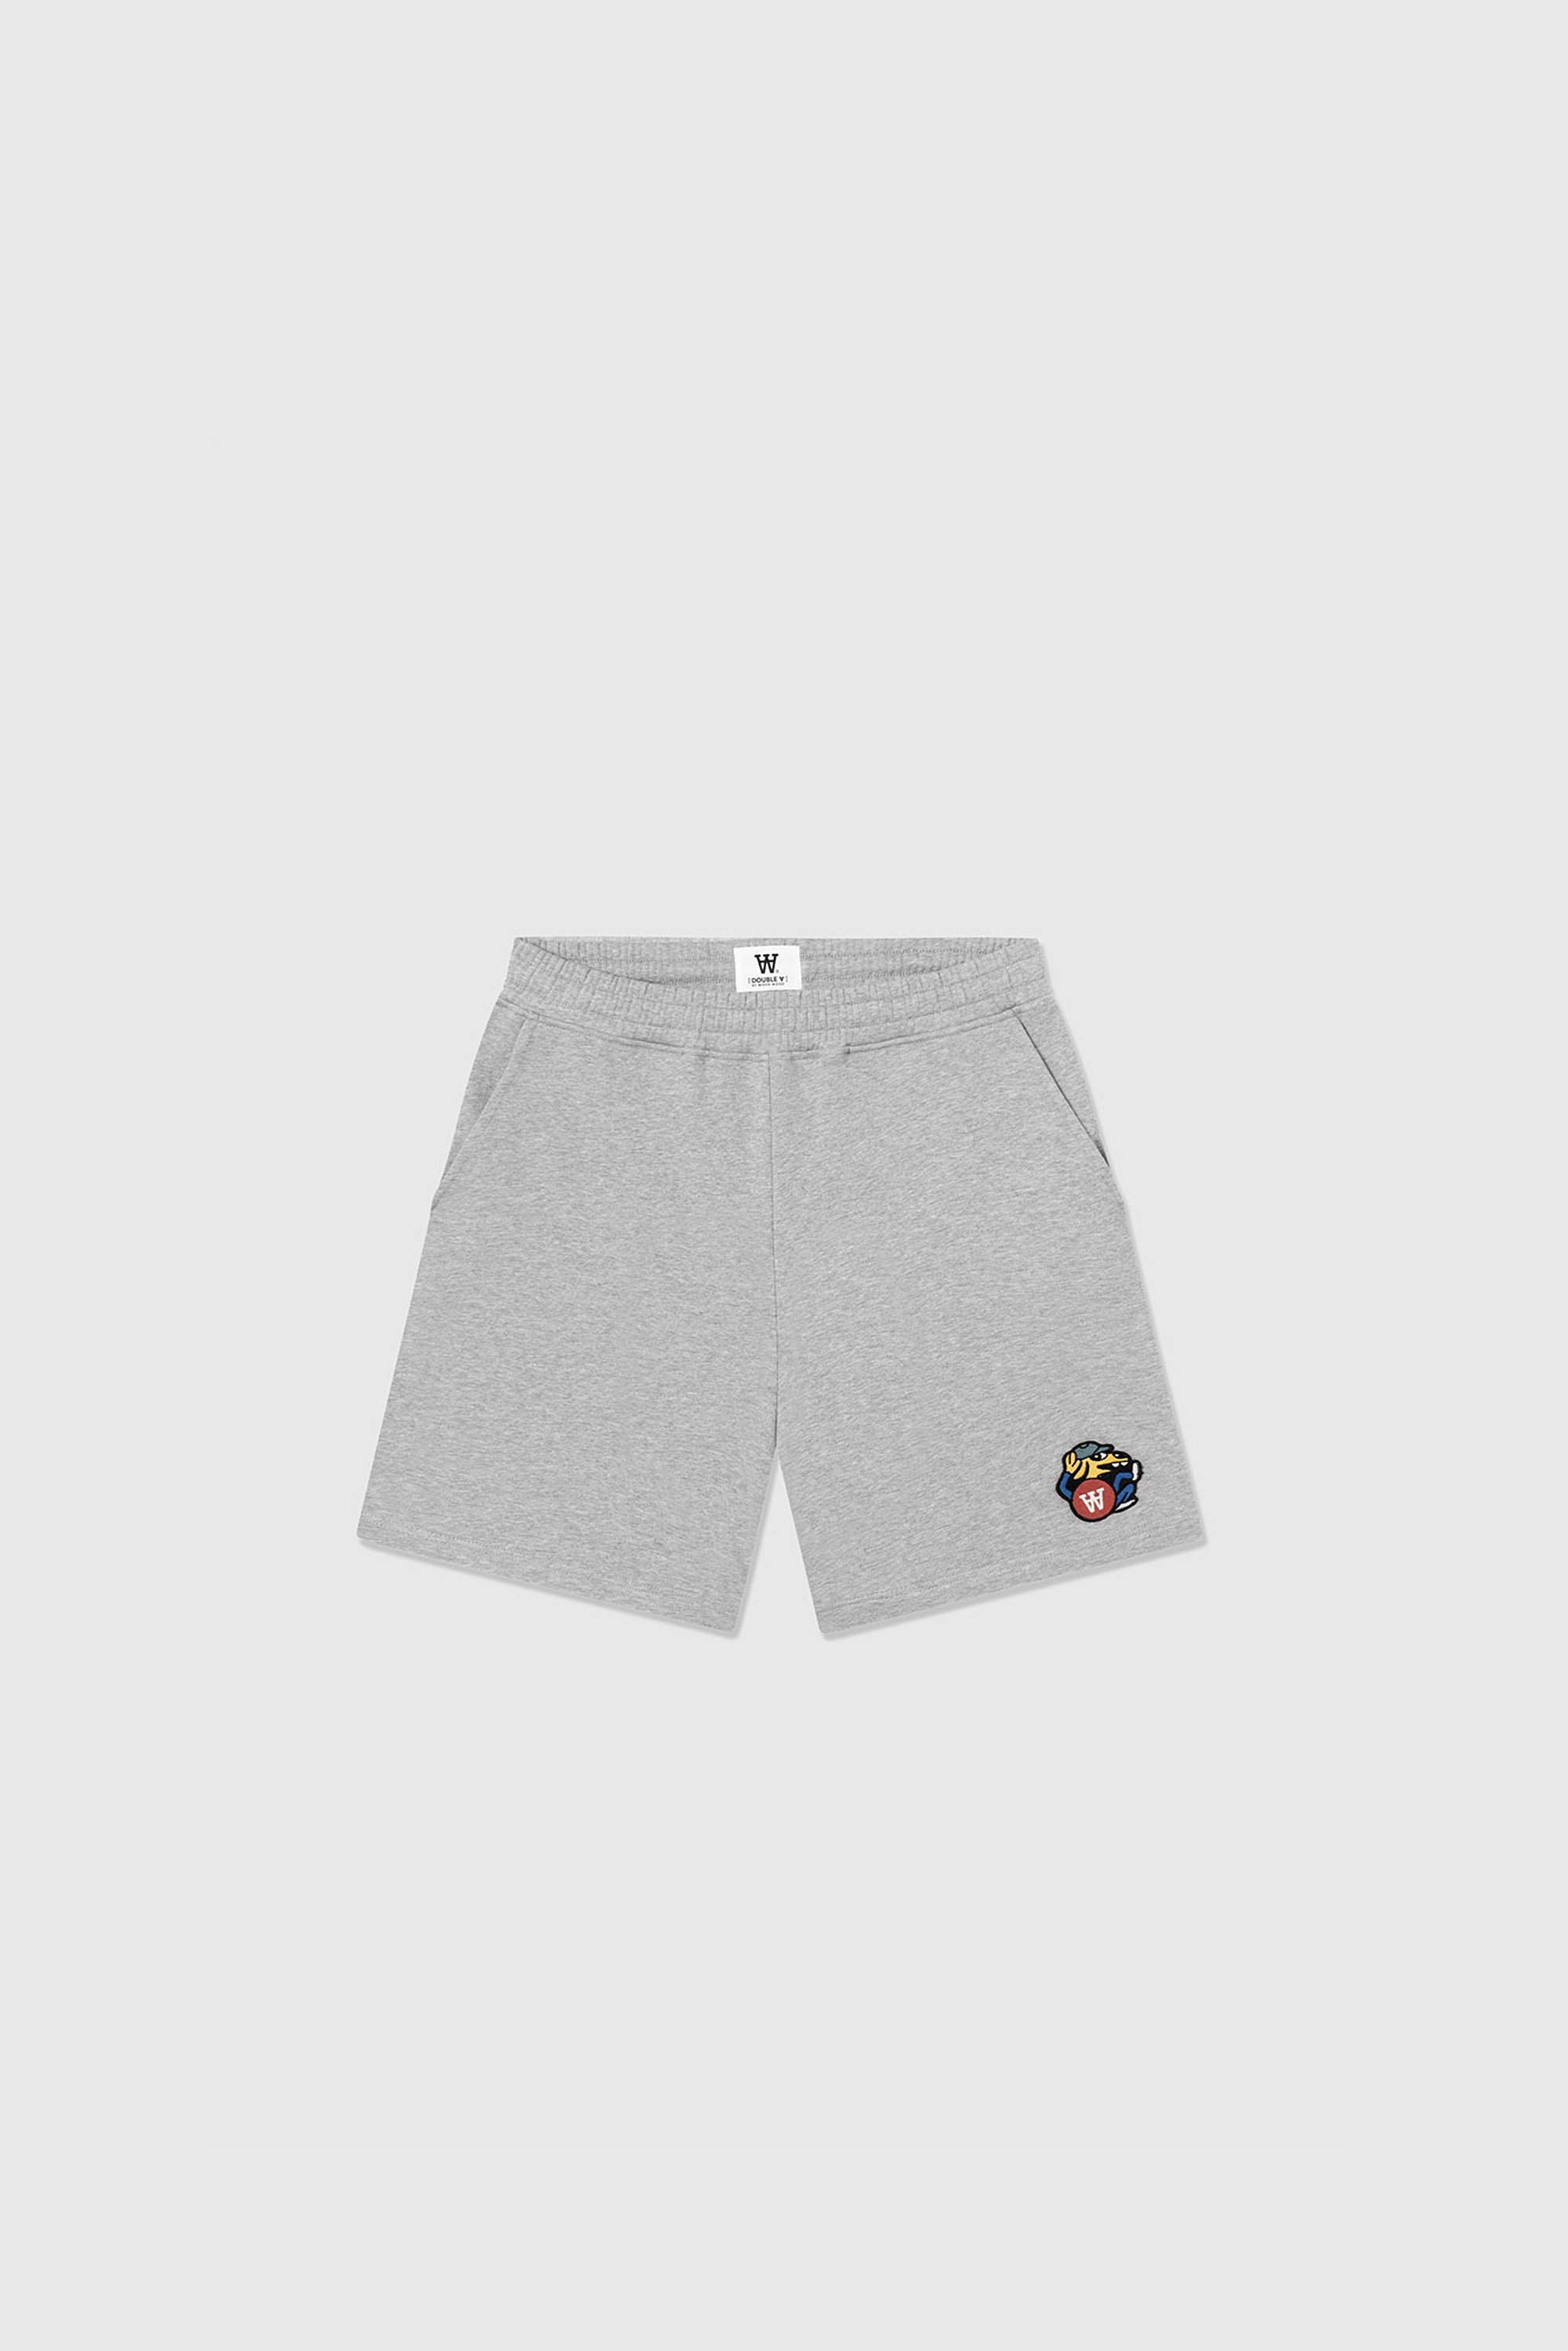 Double A by Wood Wood Jax doggy patch jogger shorts Grey melange ...